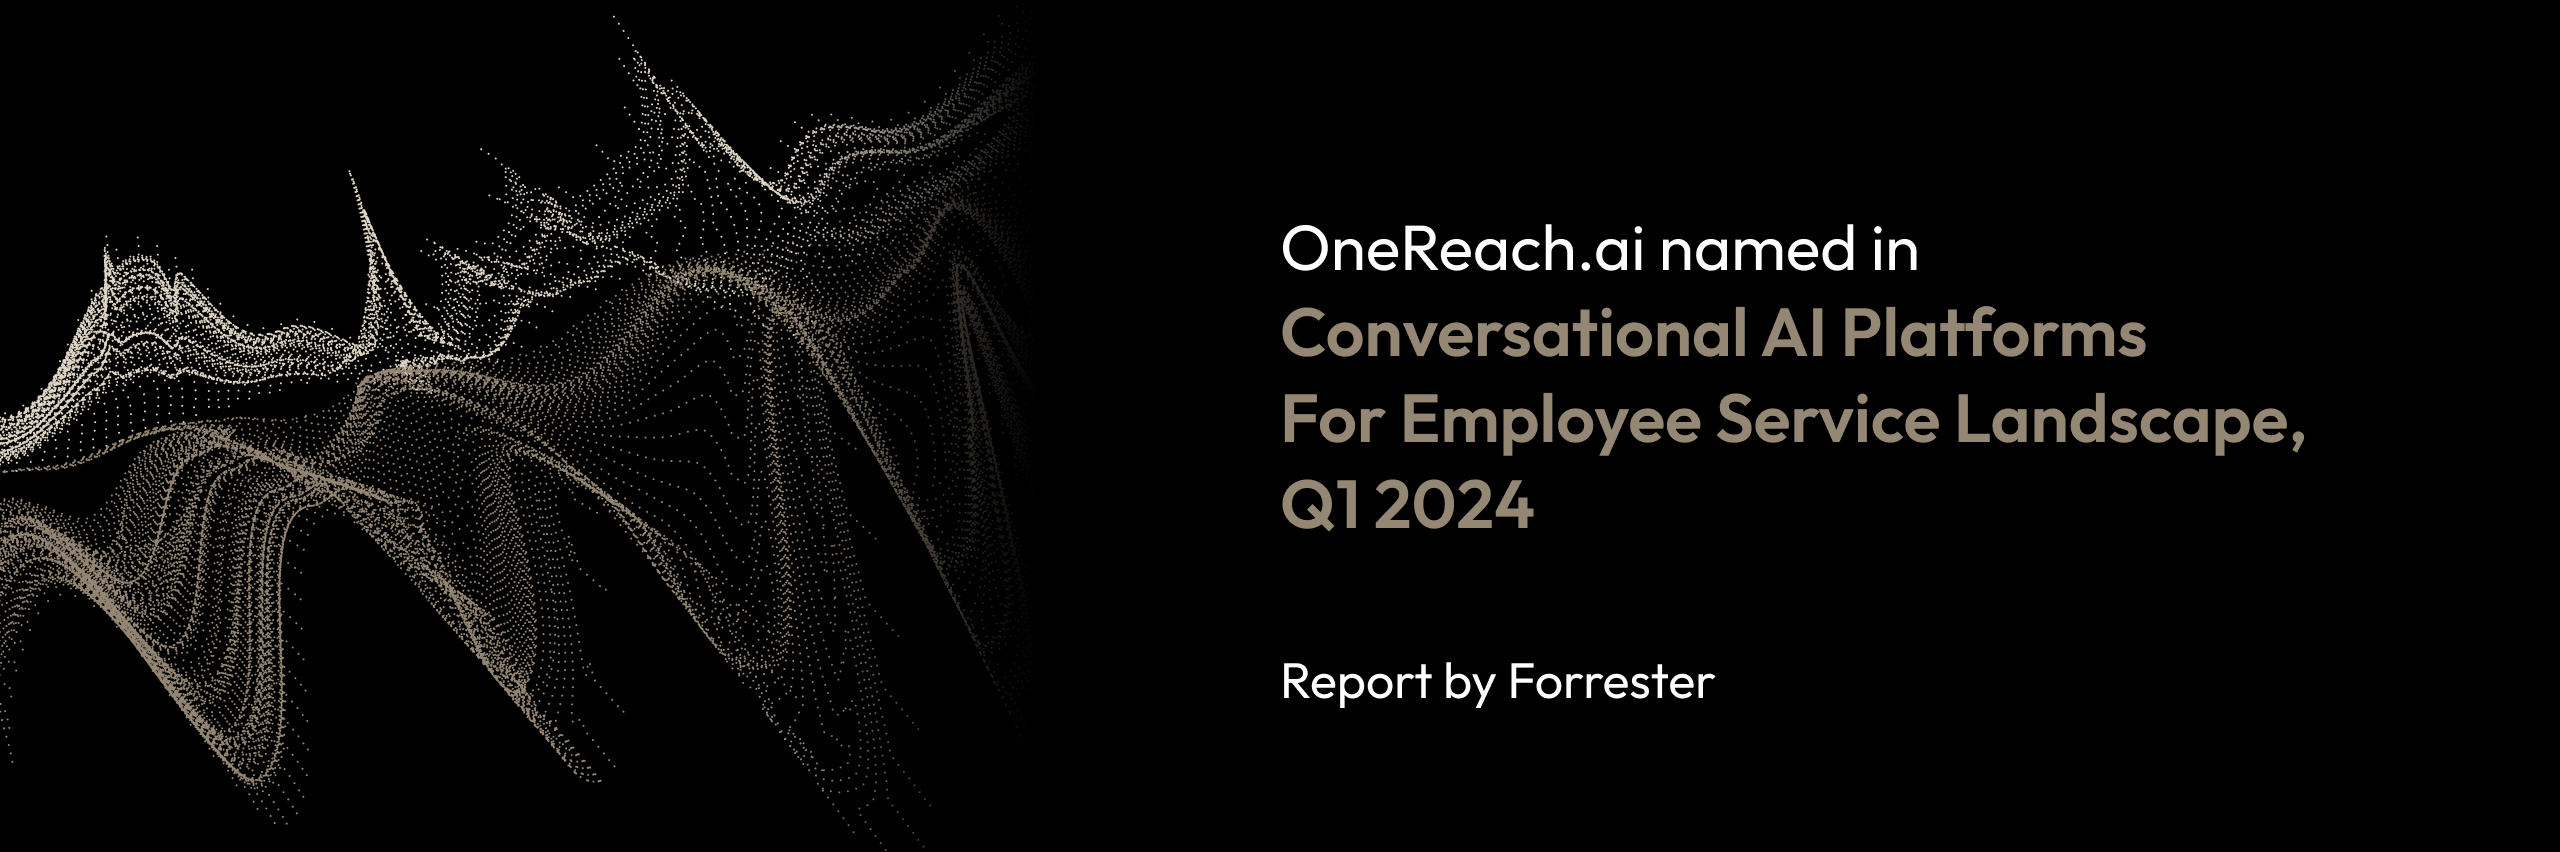 OneReach.ai Named in the Conversational AI Platforms For Employee Service Landscape, Q1 2024 Report by Forrester